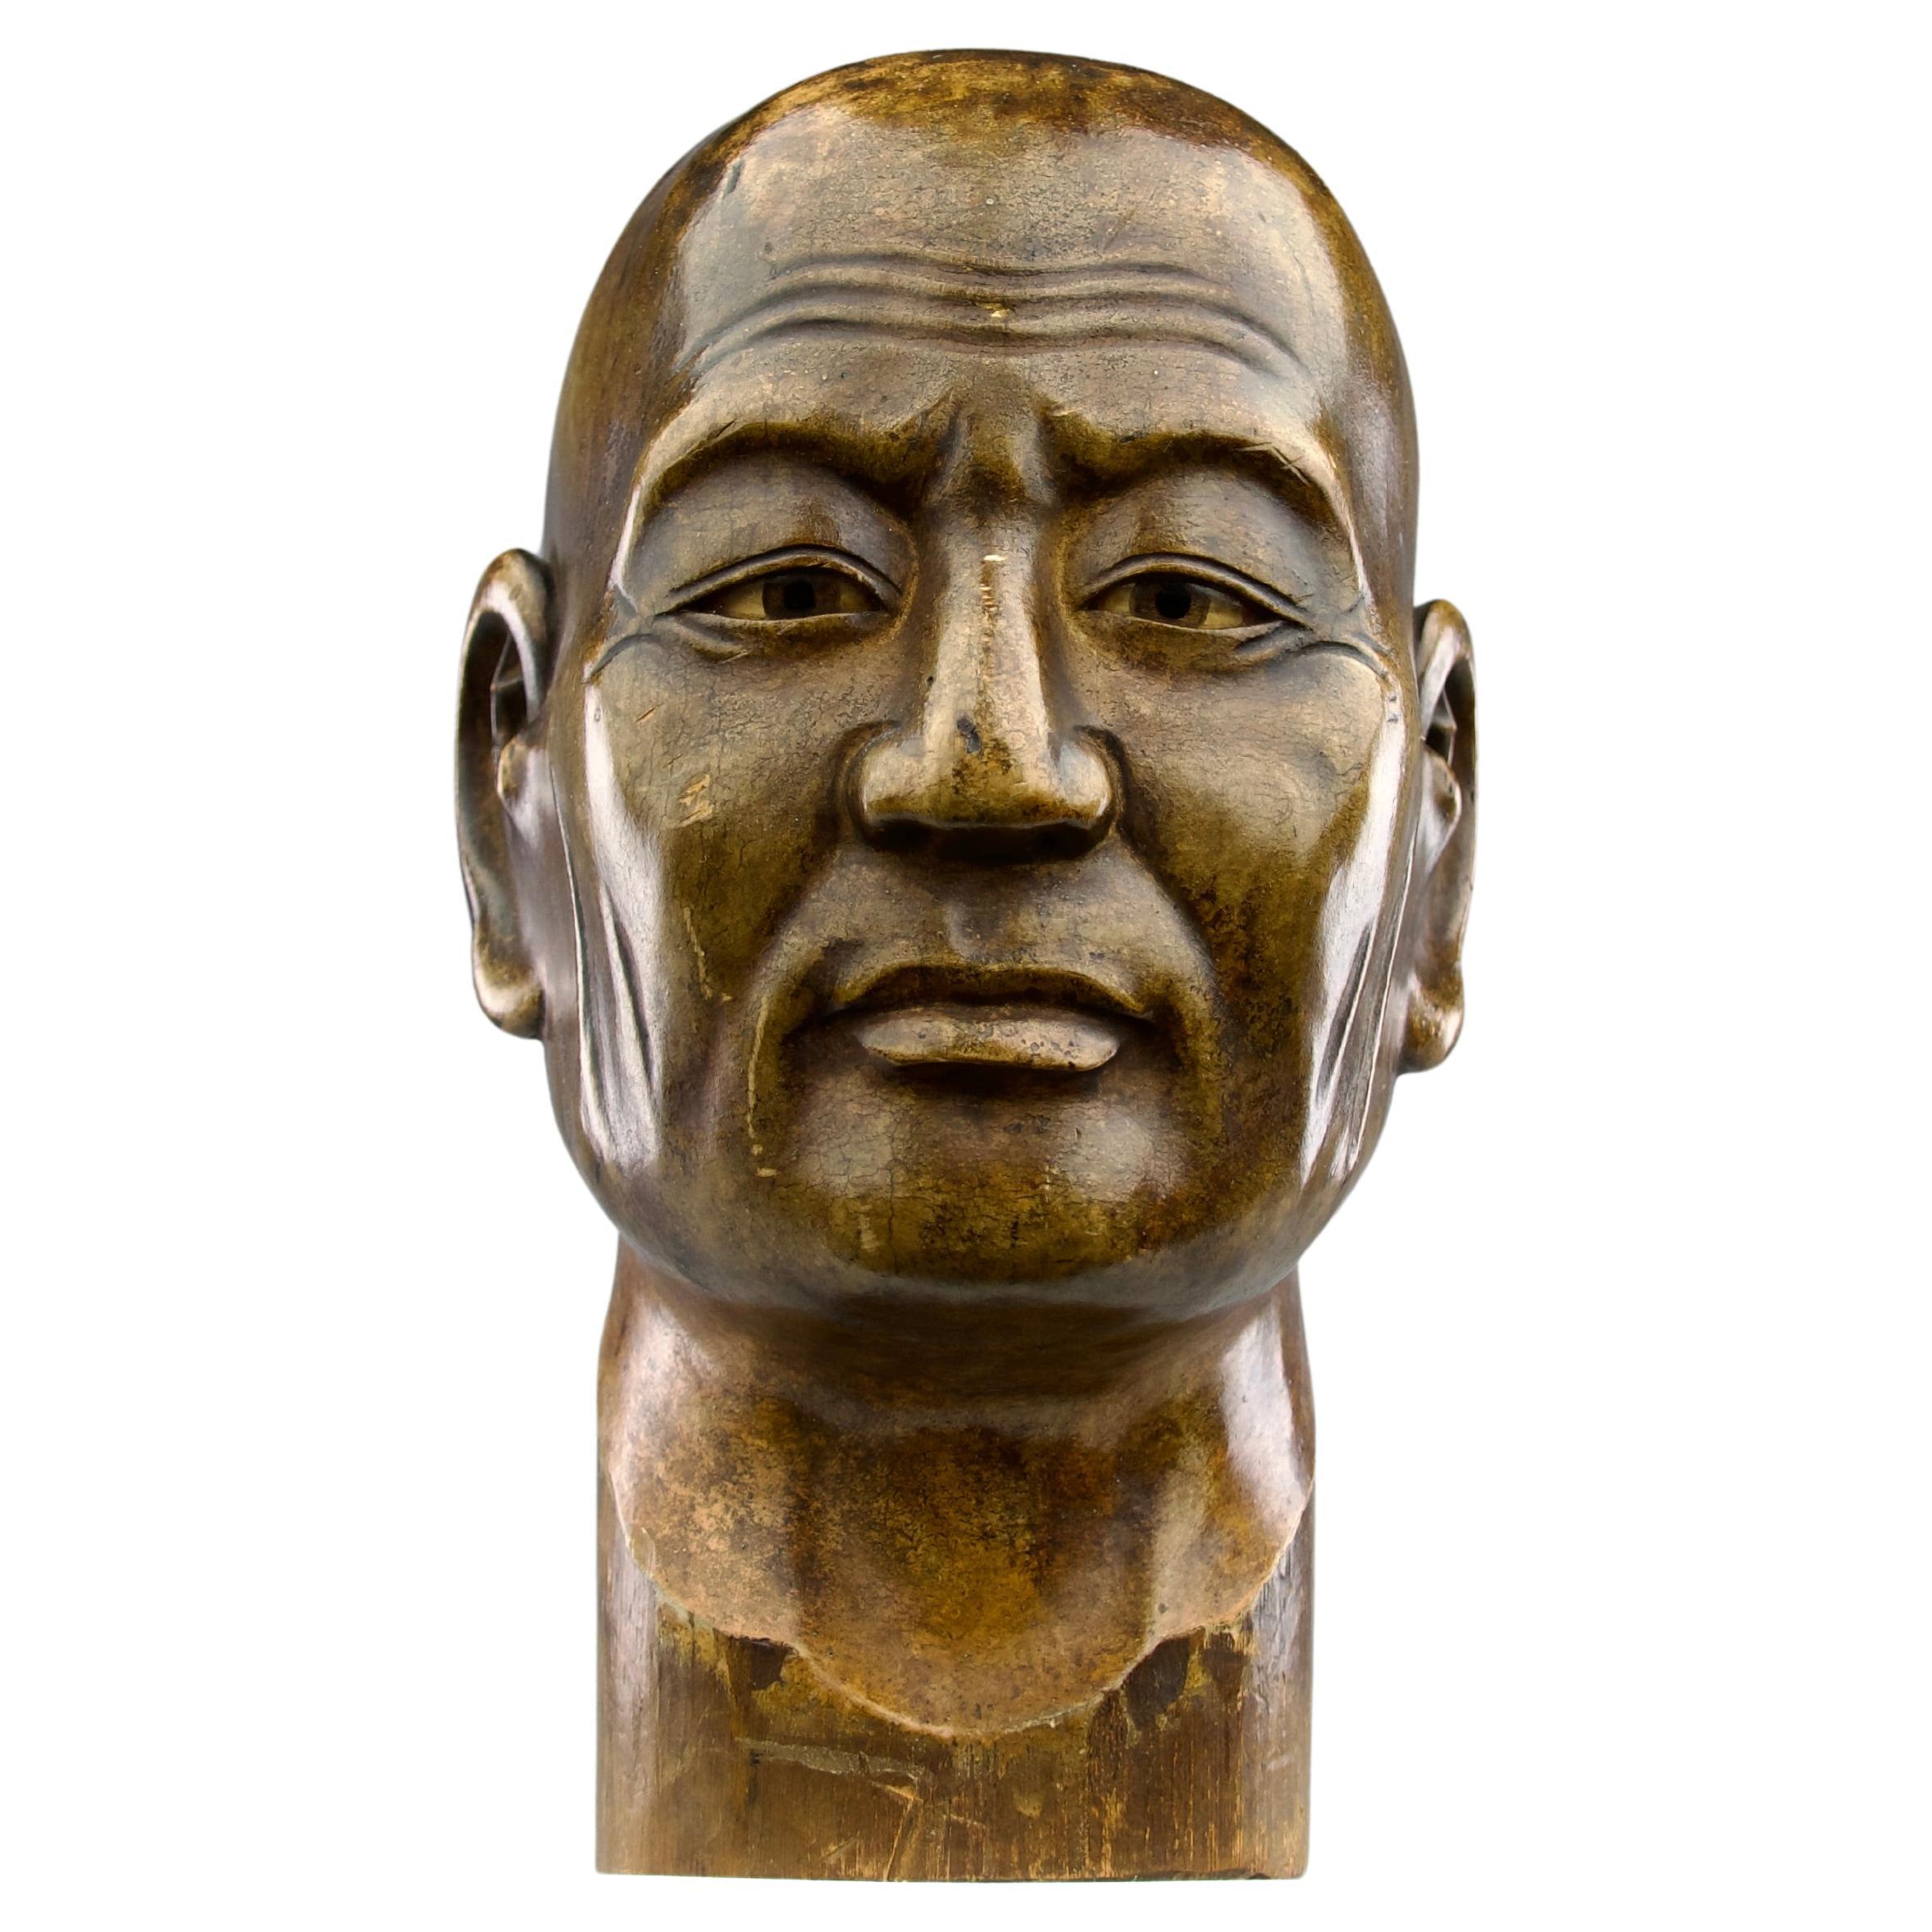 Monk Head Bamboo and Glass Sculpture, Japan 19th Century, Edo Period